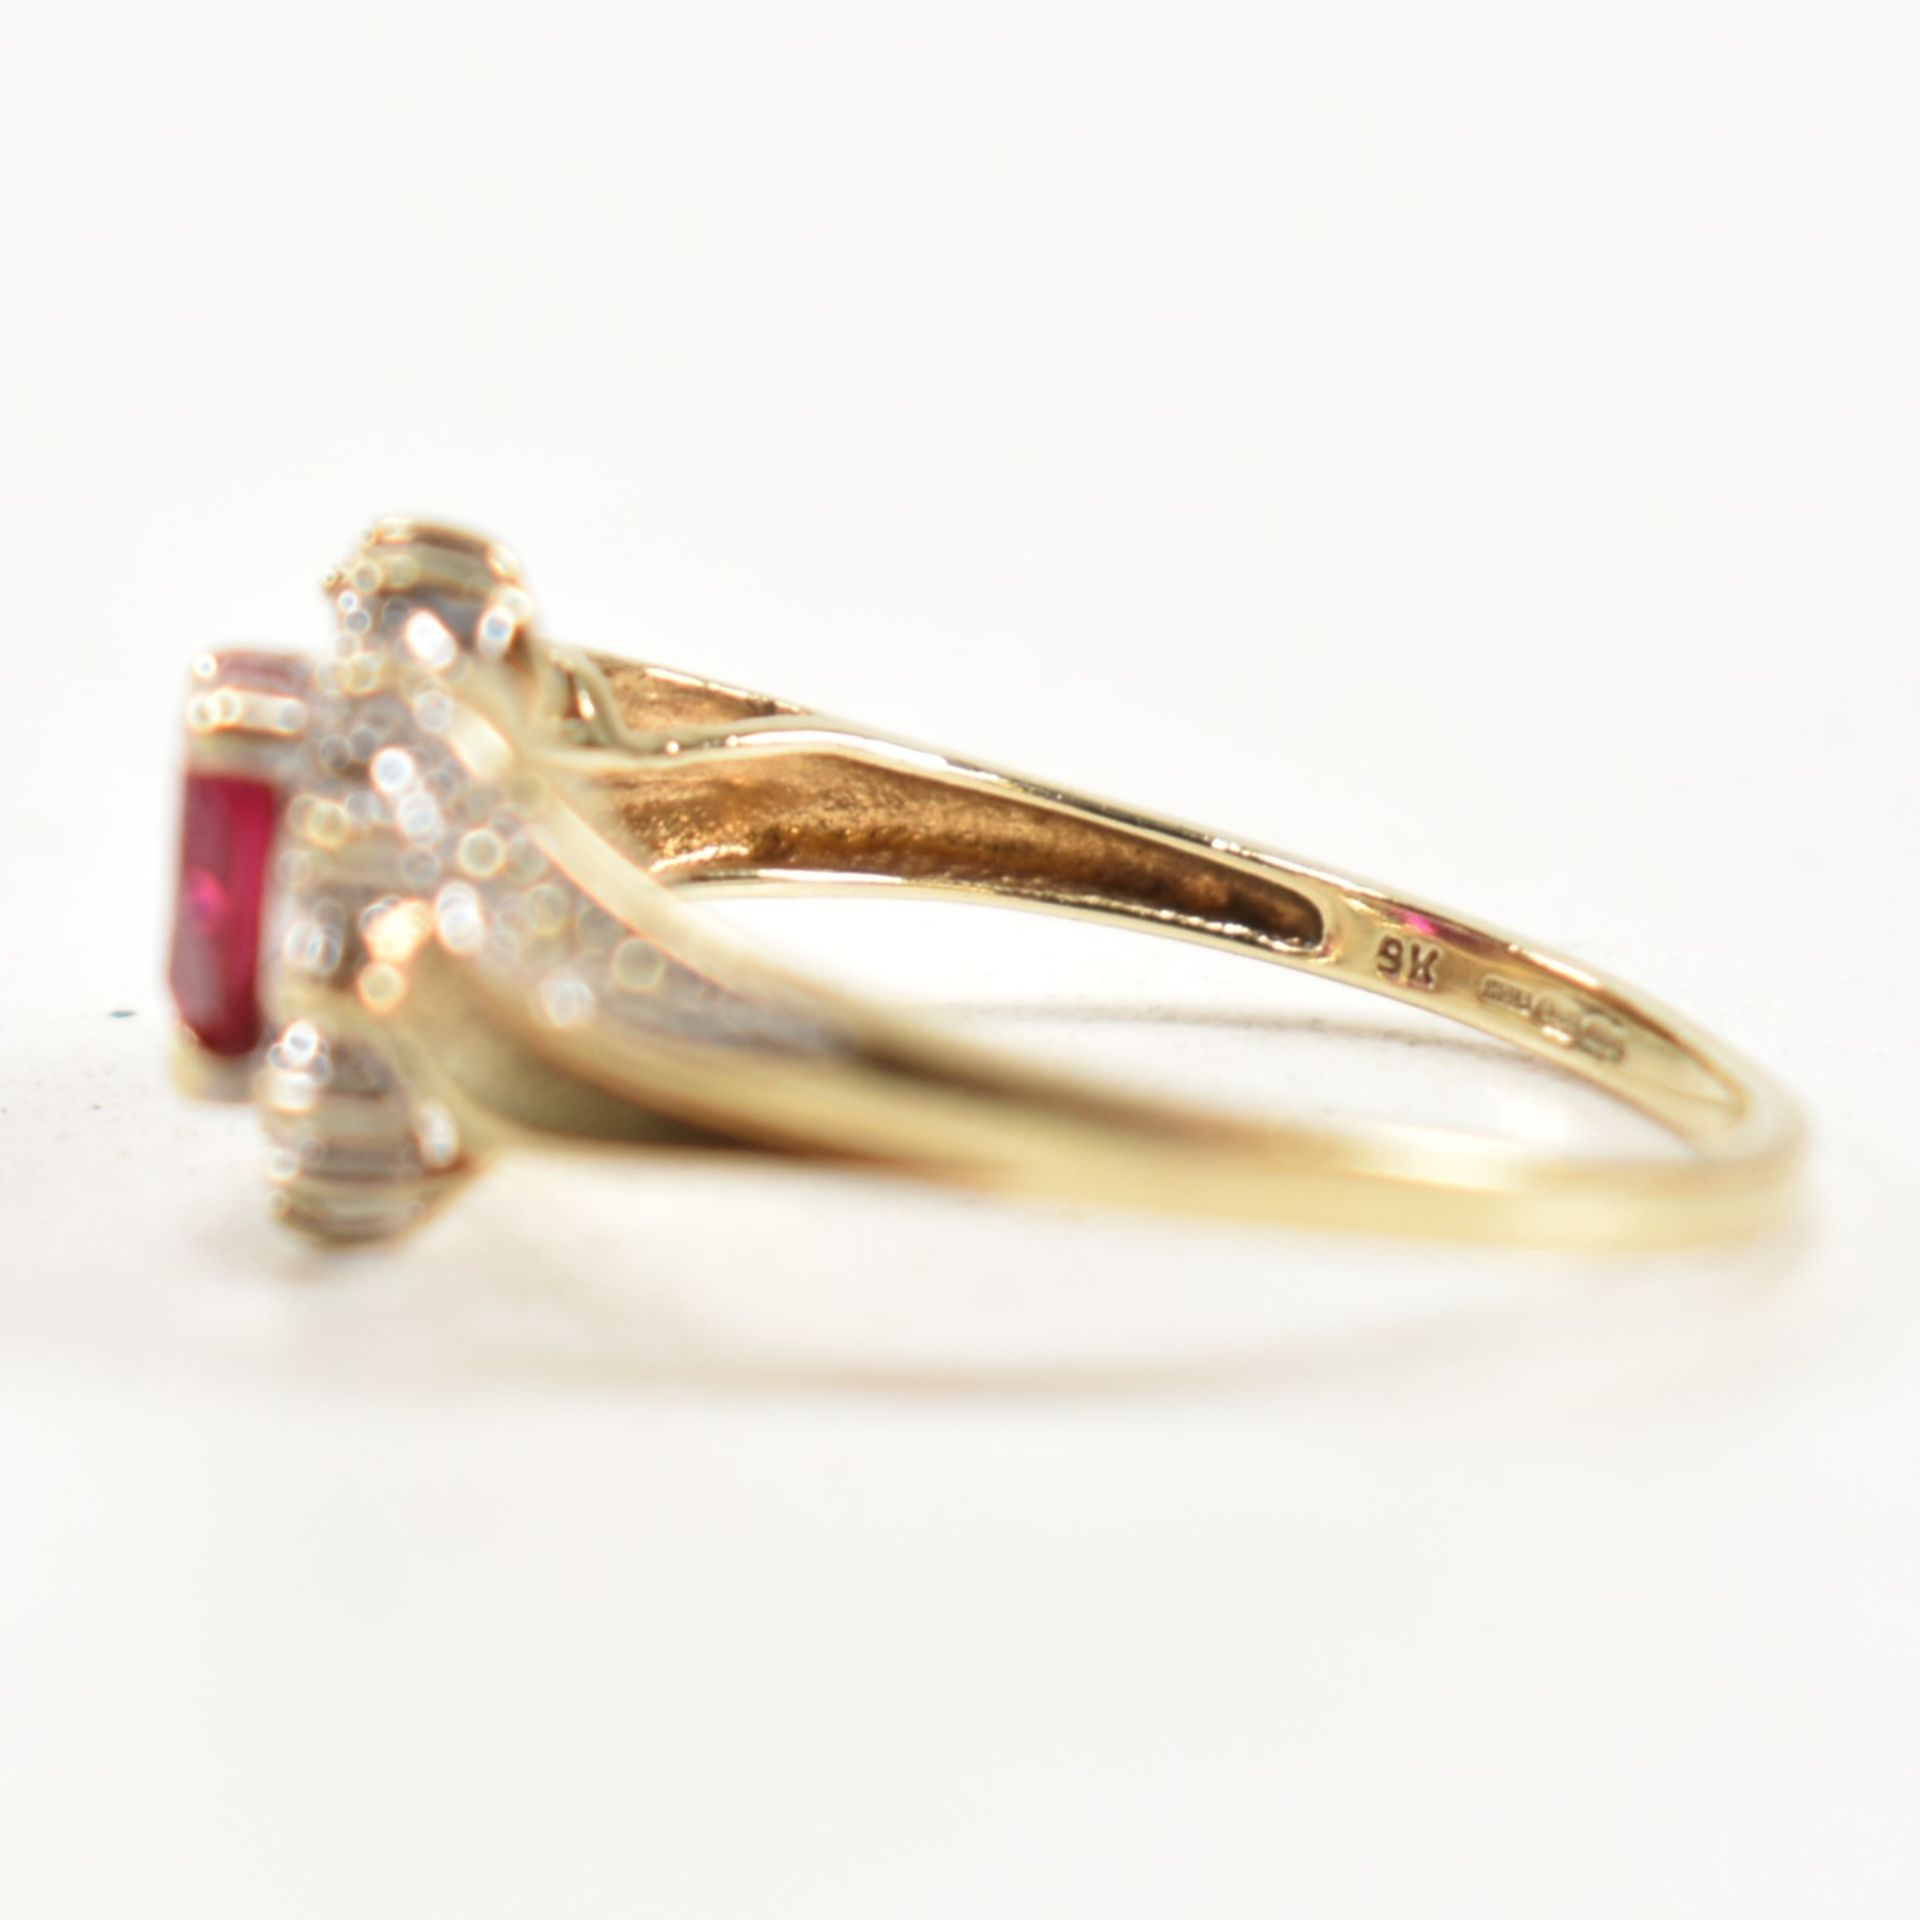 HALLMARKED 9CT GOLD DIAMOND & RUBY CLUSTER RING - Image 7 of 10